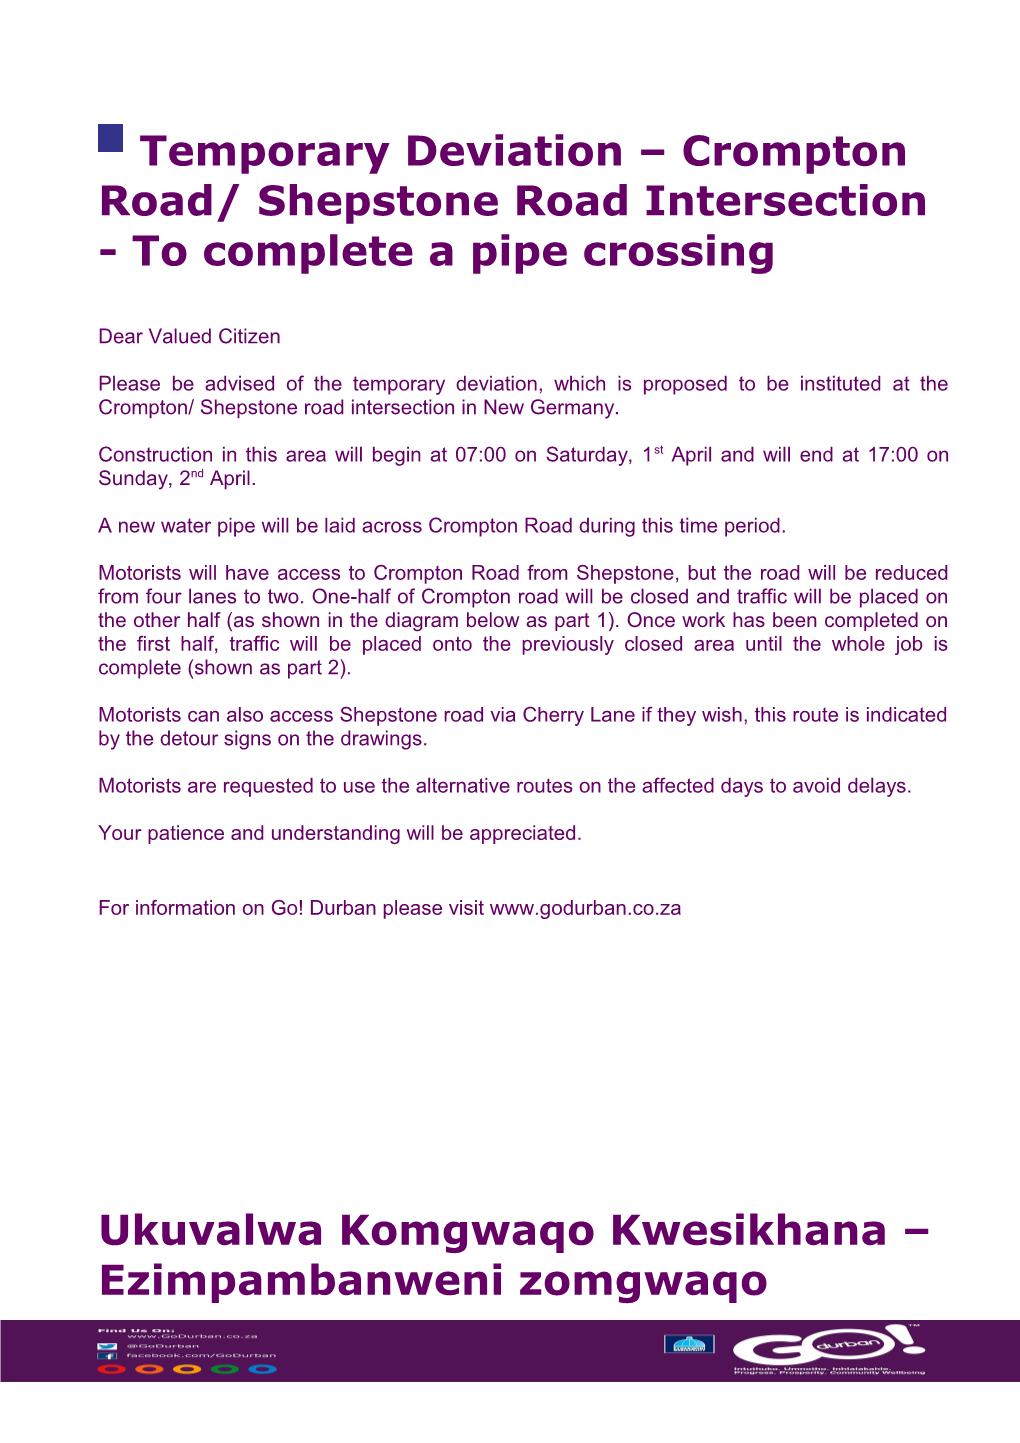 Temporary Deviation Crompton Road/ Shepstone Roadintersection - to Complete a Pipe Crossing